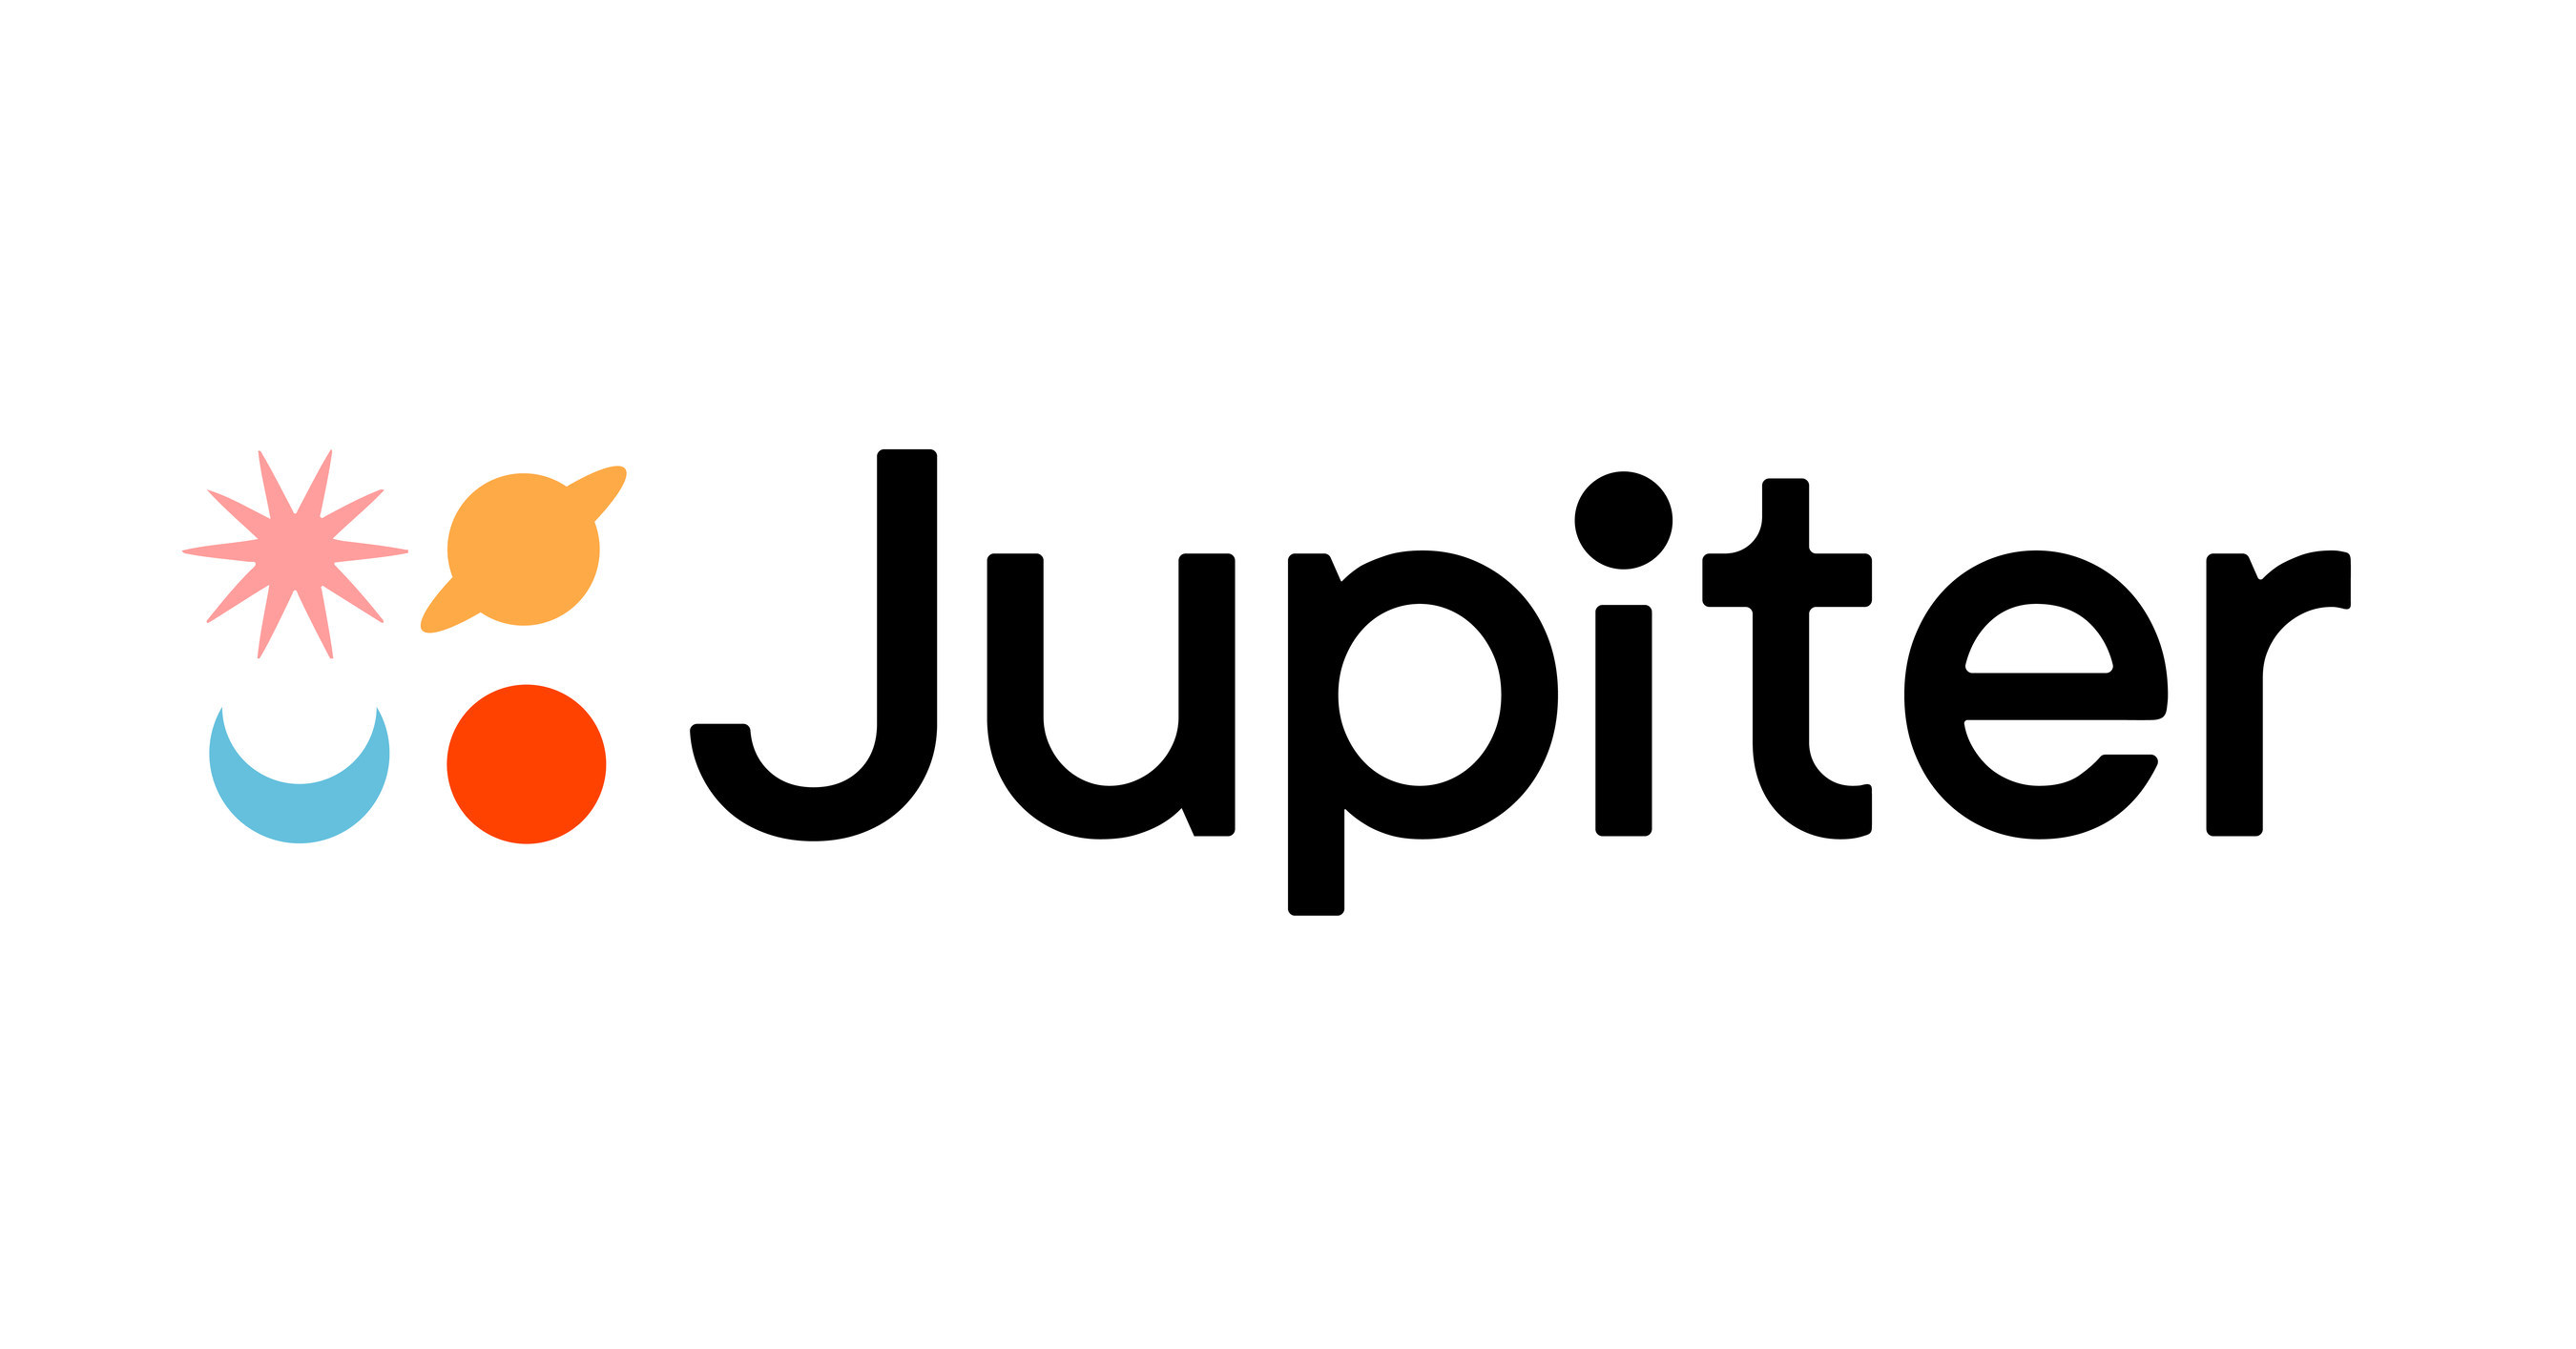 Launching Jupiter, the creator-first recipe and grocery shopping platform - PR Newswire